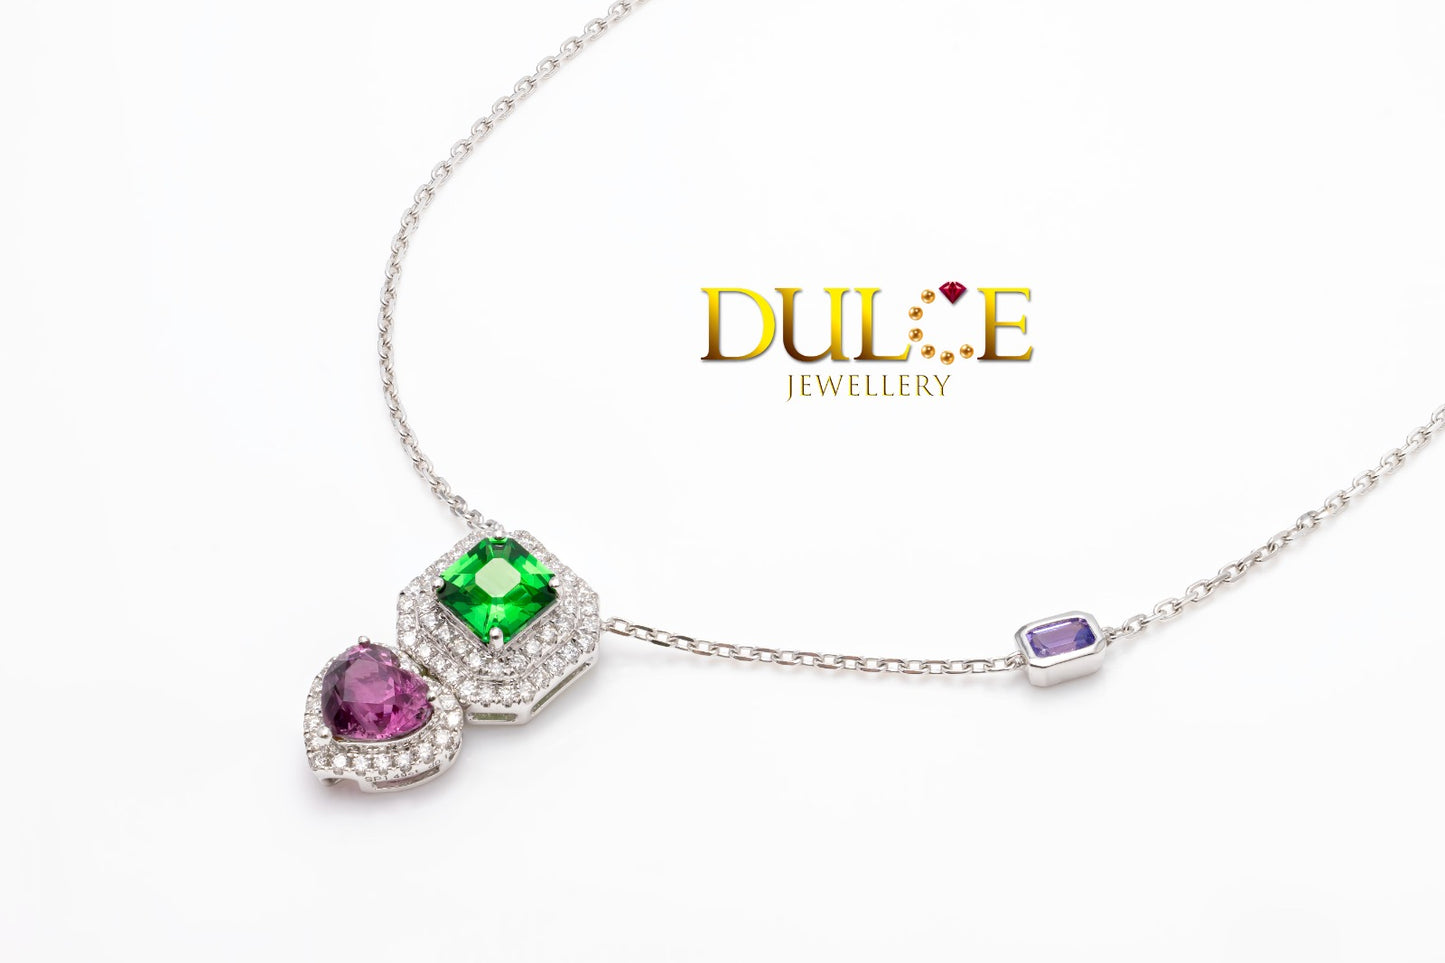 18K Gold Tsavorite Necklace with Purple Spinel Pendant